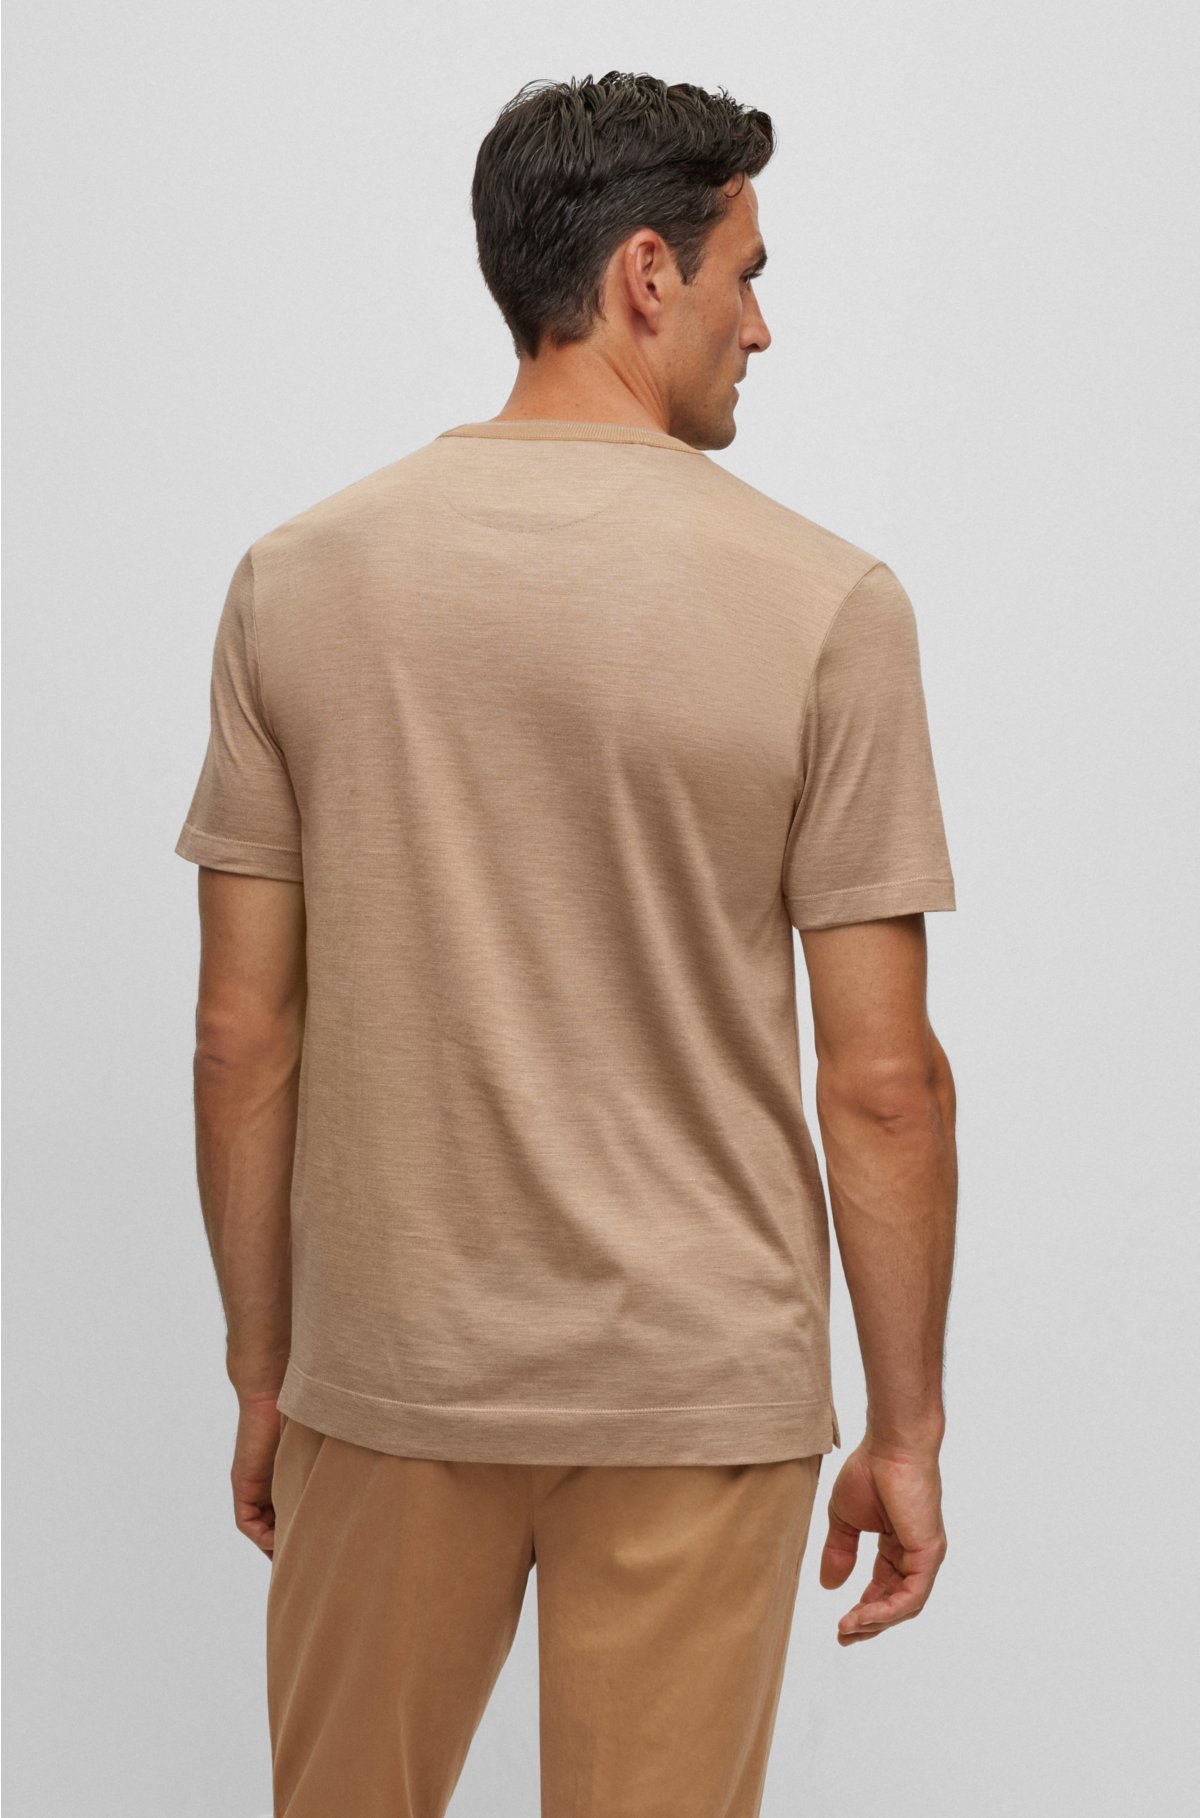 Cotton-silk T-shirt with fineline stripes and double collar, Beige